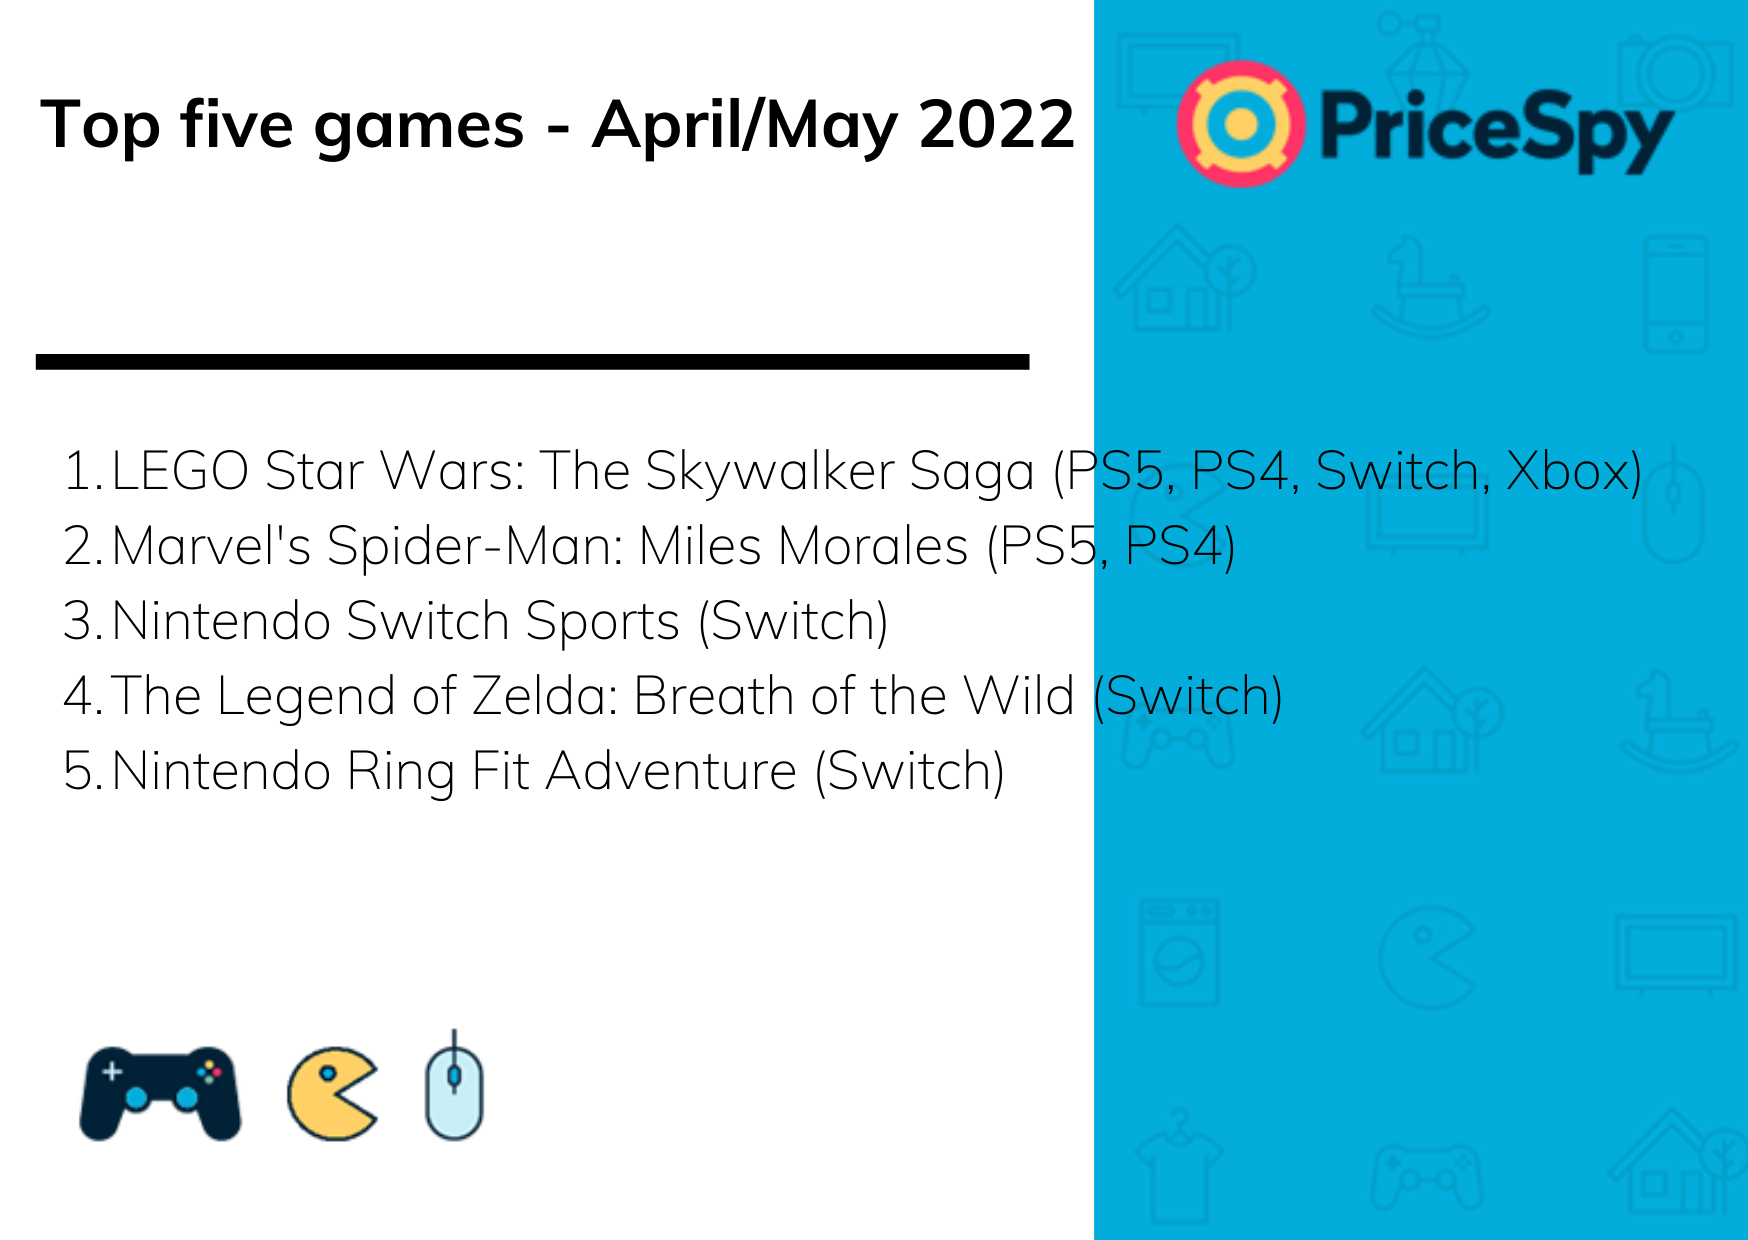 Pricespy Games of the Month